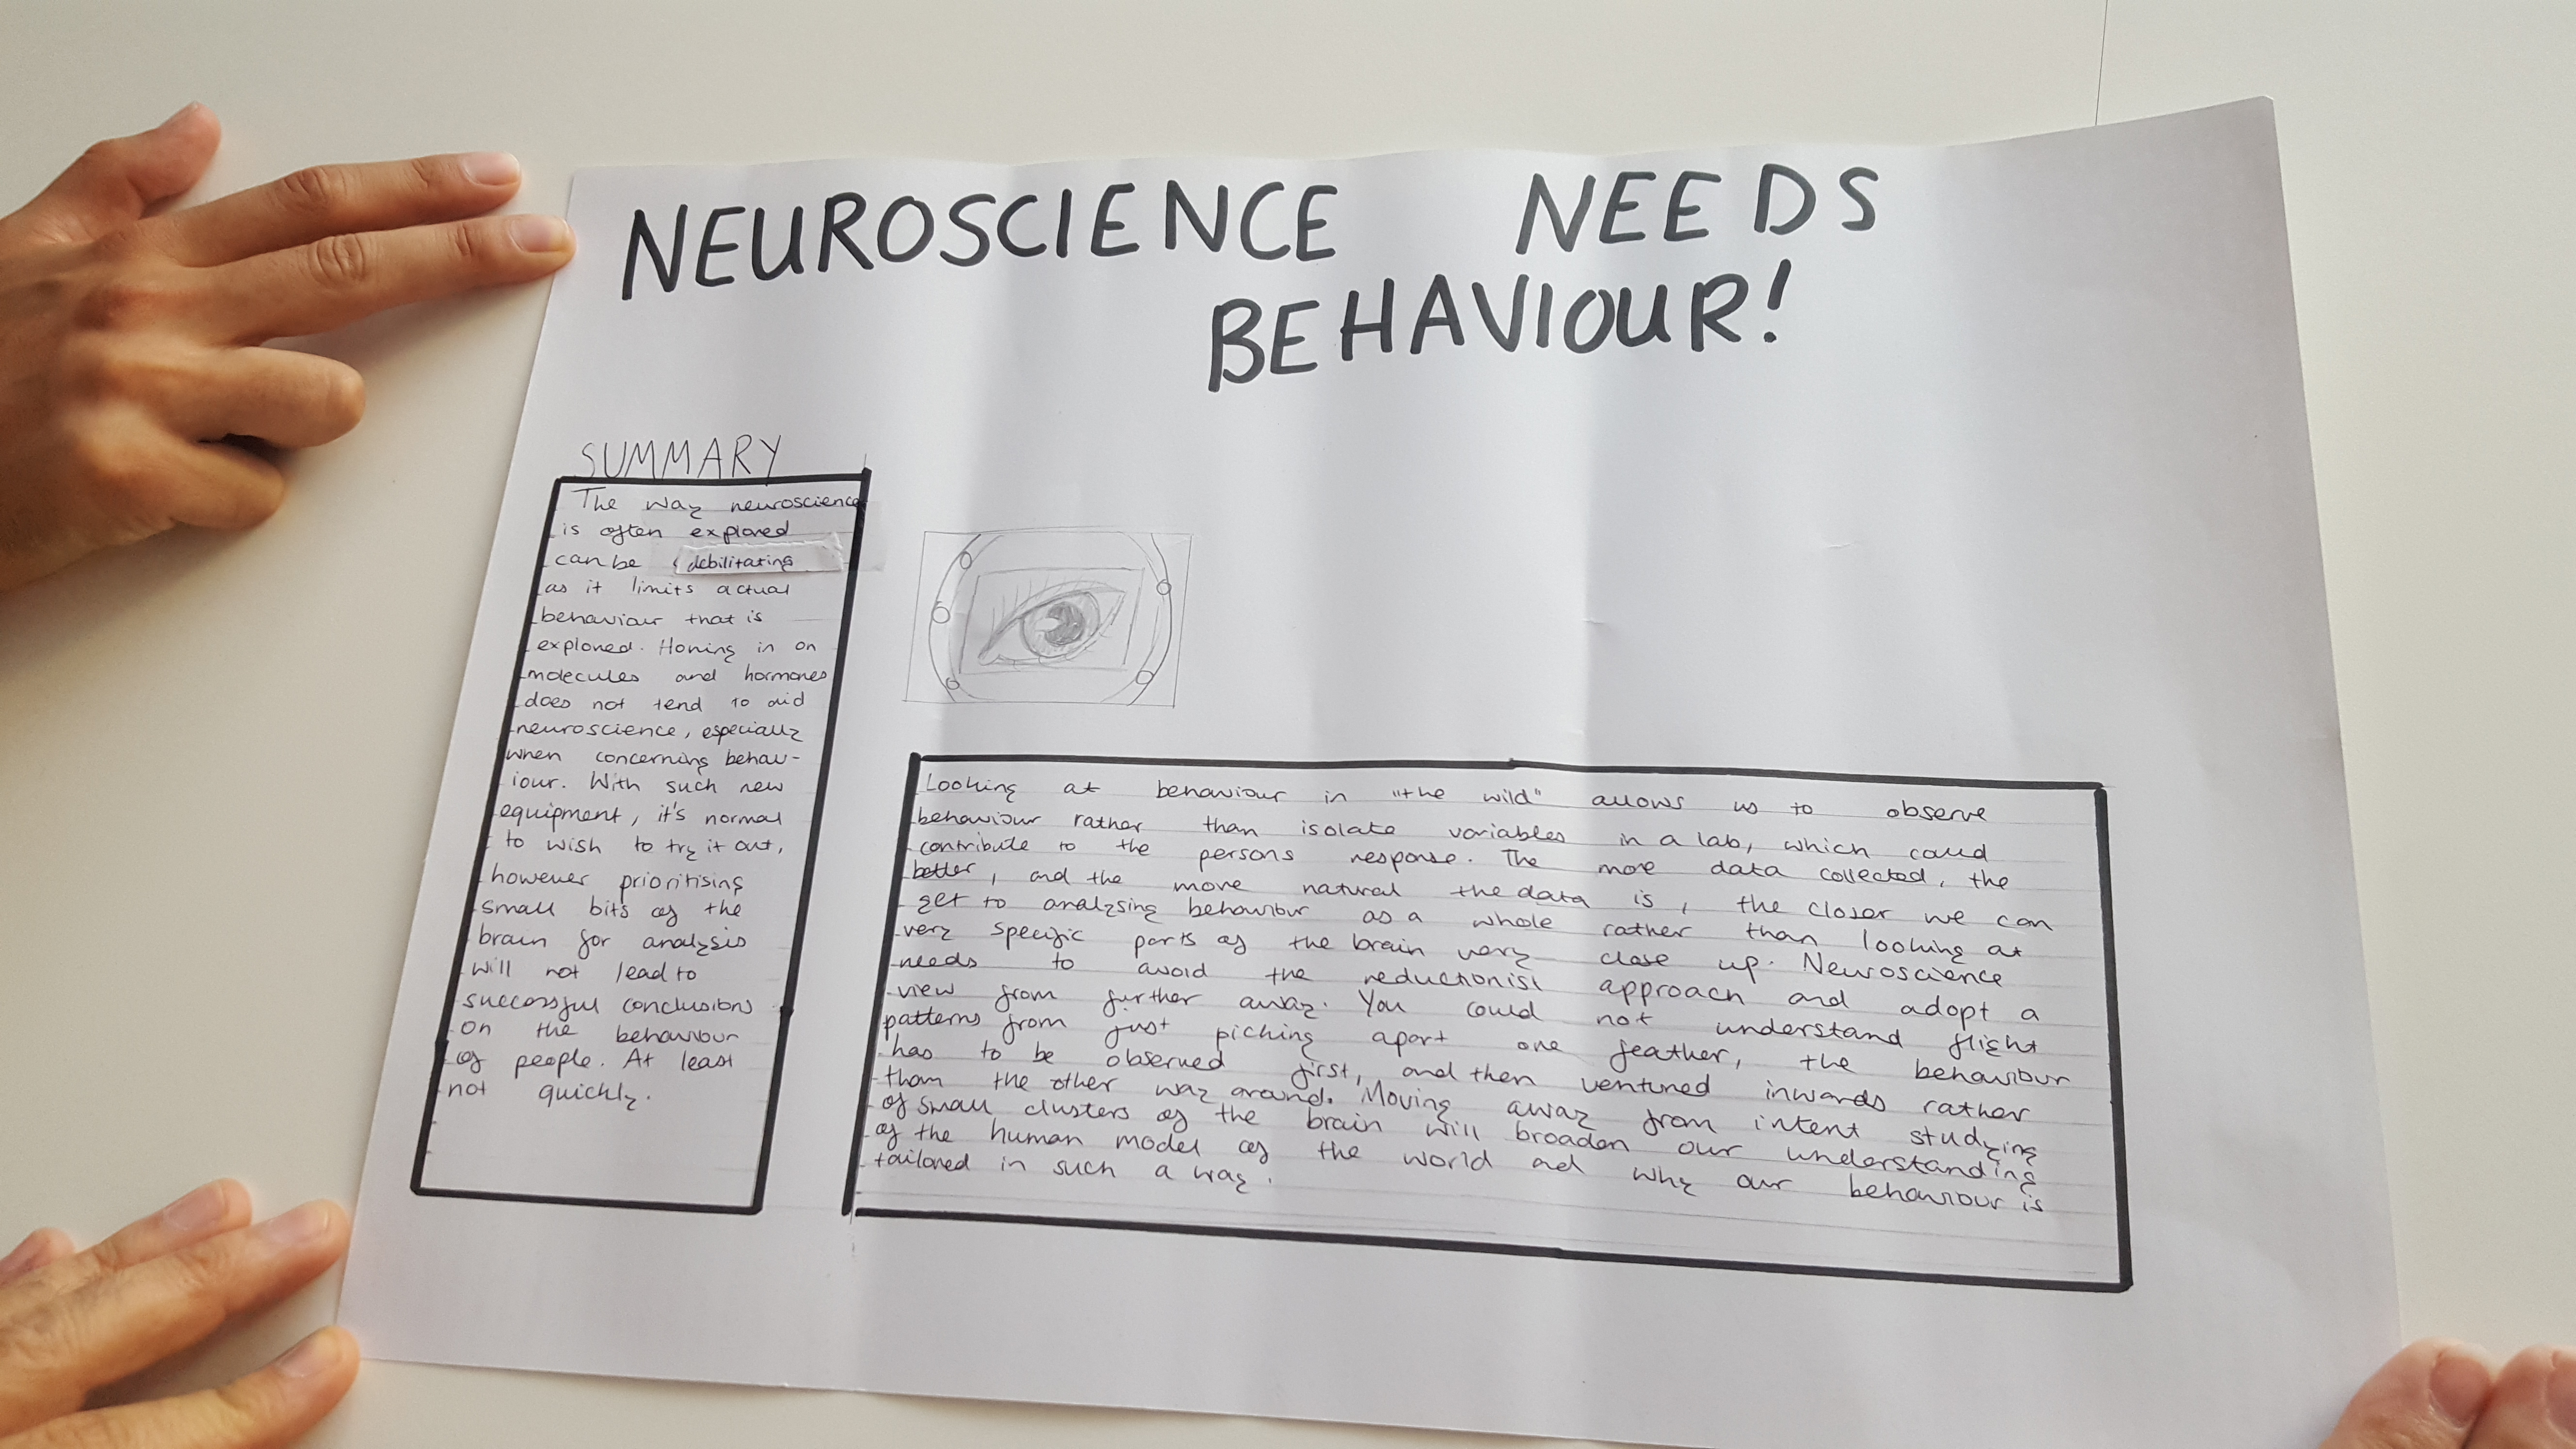 Reanna's Nuffield Research Poster, part 3